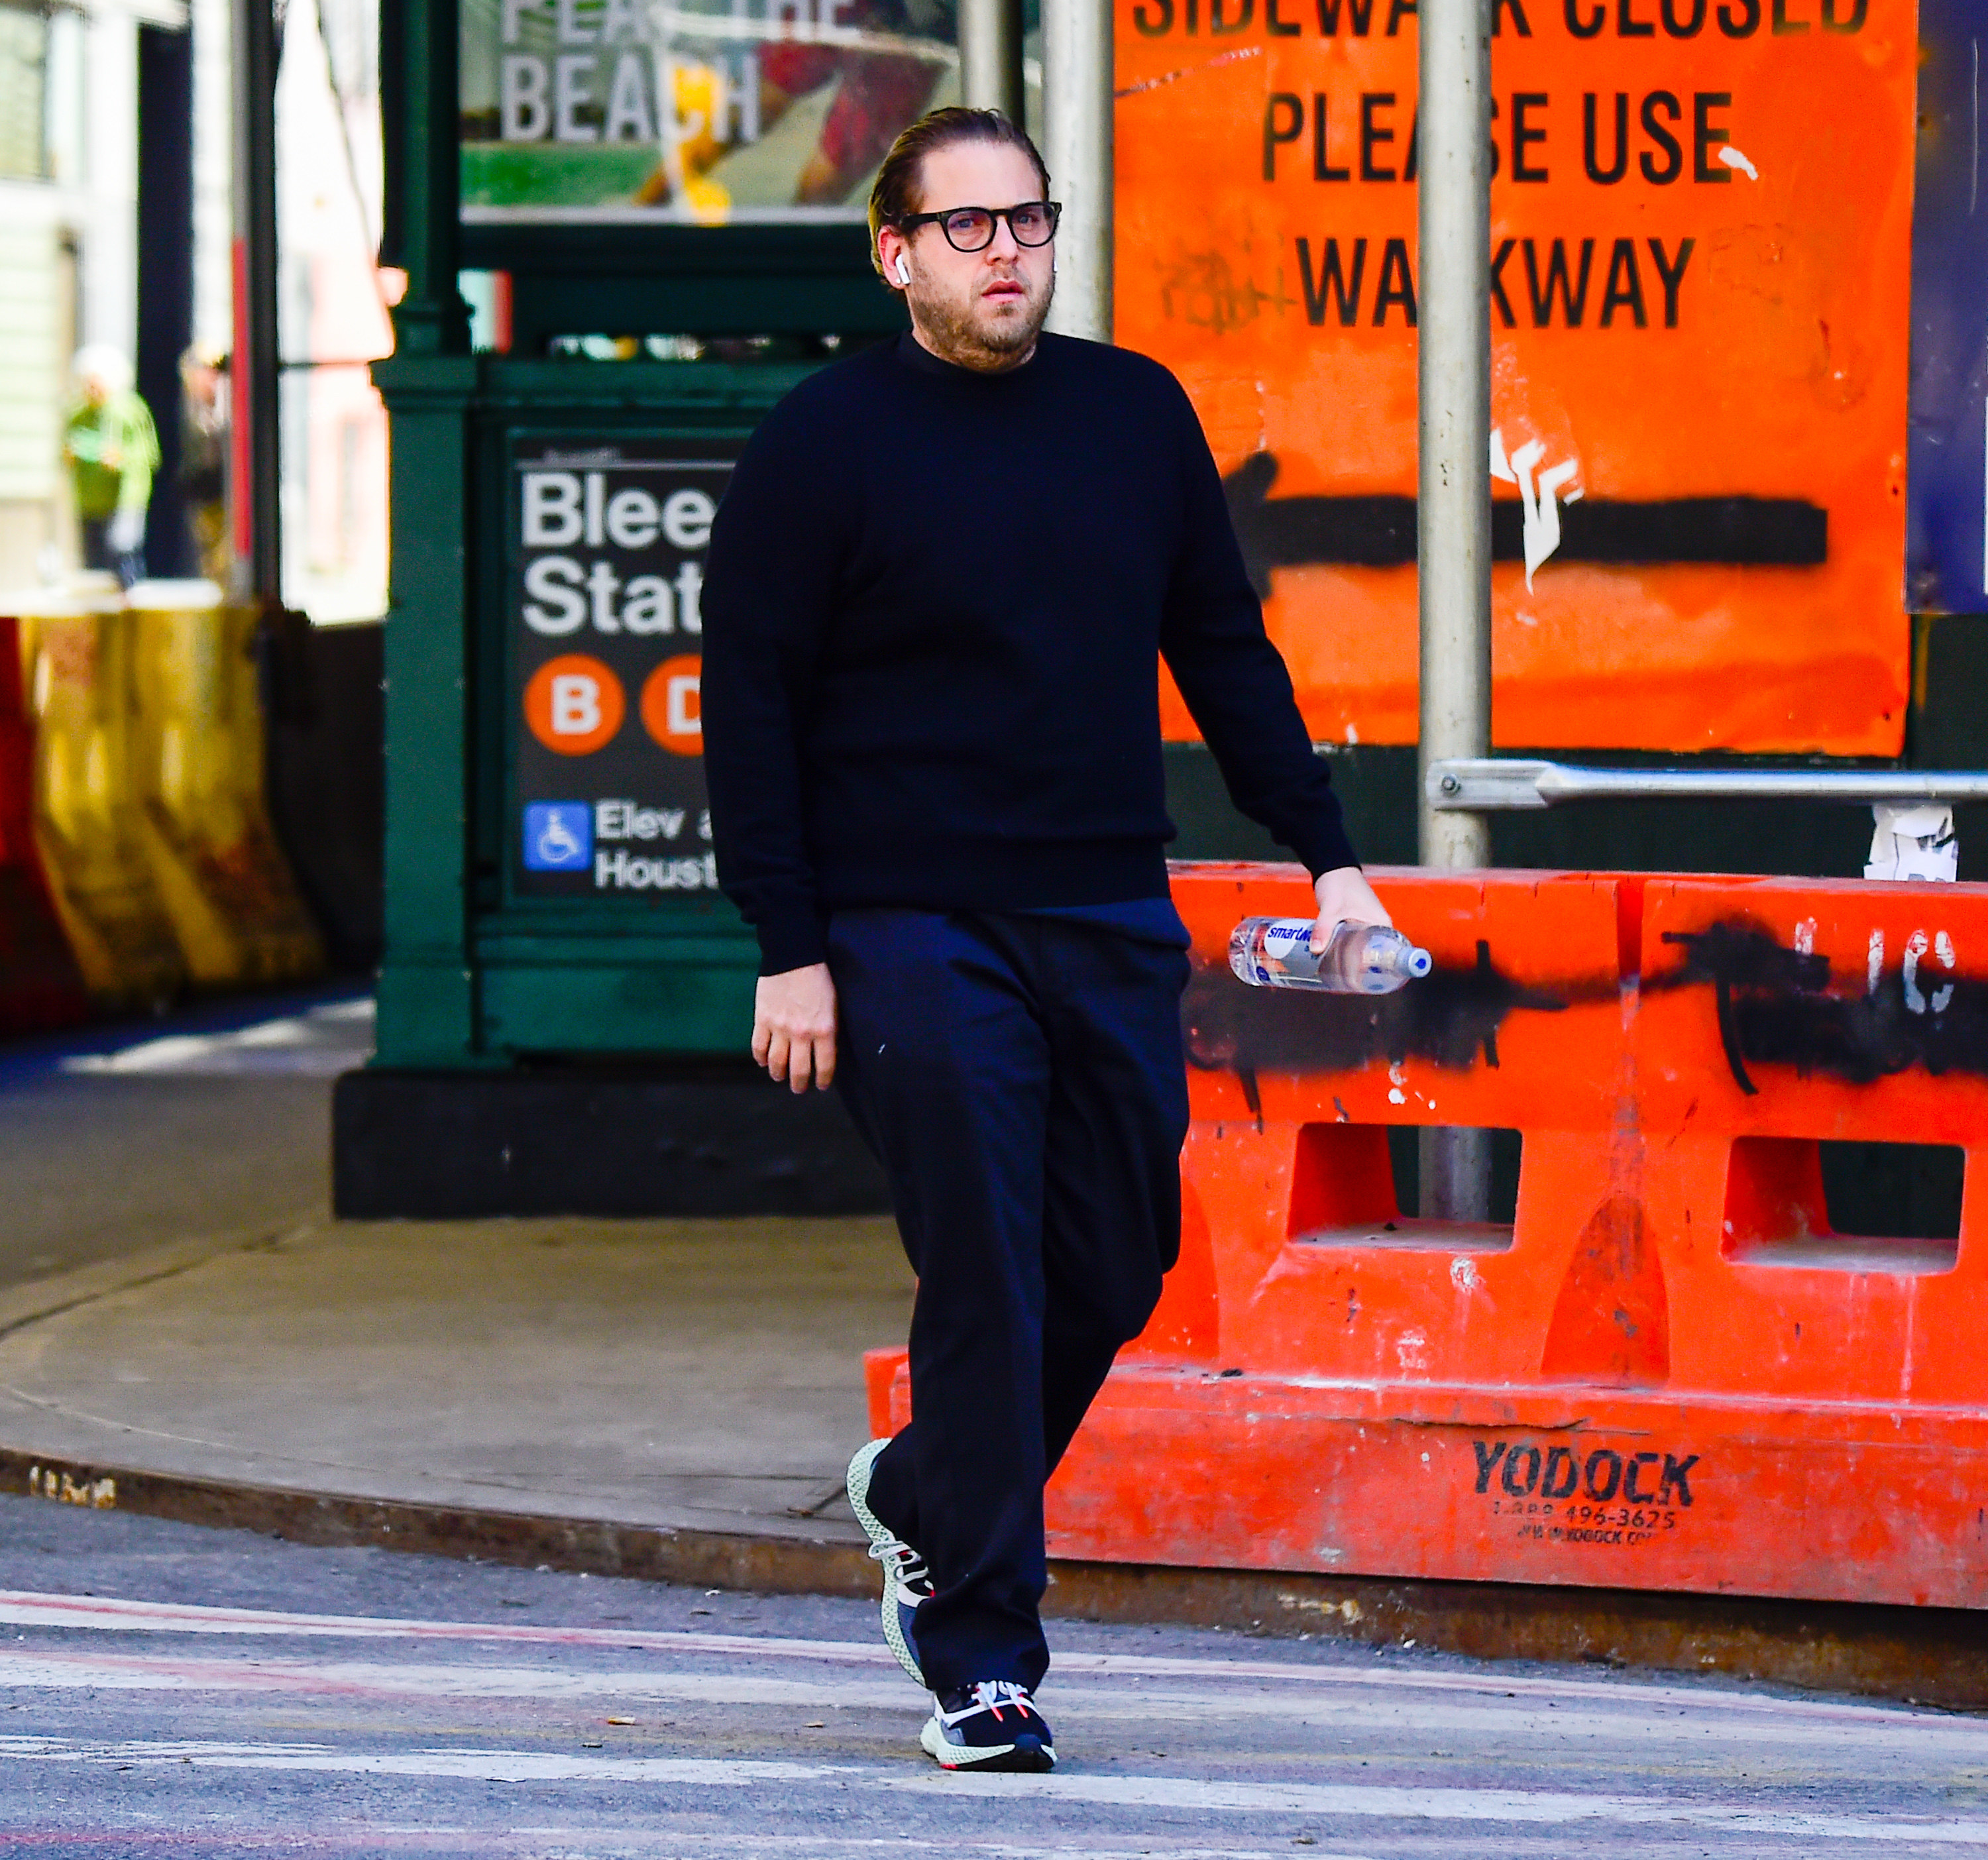 A bespectacled Jonah, wearing sneakers and holding a beverage bottle, walks past the Bleecker Street station in New York City